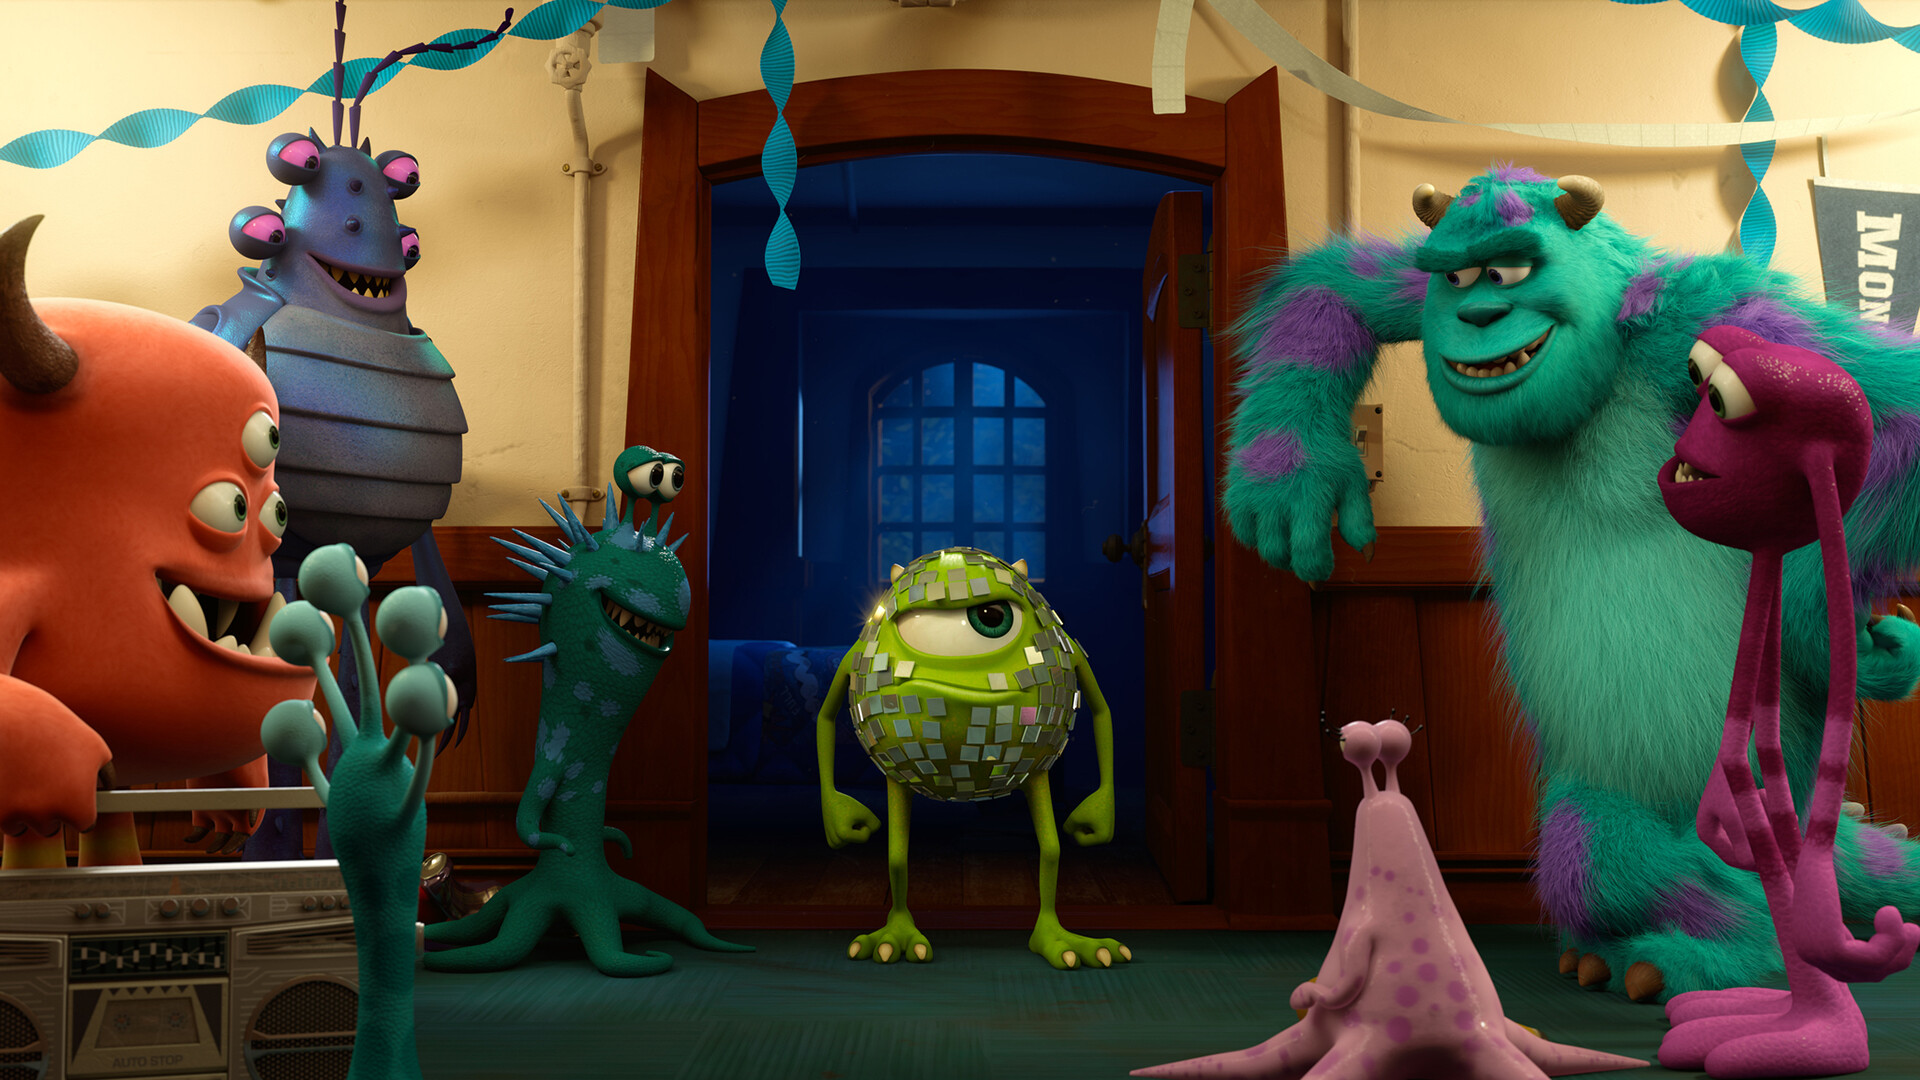 Monsters, Inc.: The 2001 animated classic 'Monster, Inc', One of the most cherished releases from Pixar. 1920x1080 Full HD Background.